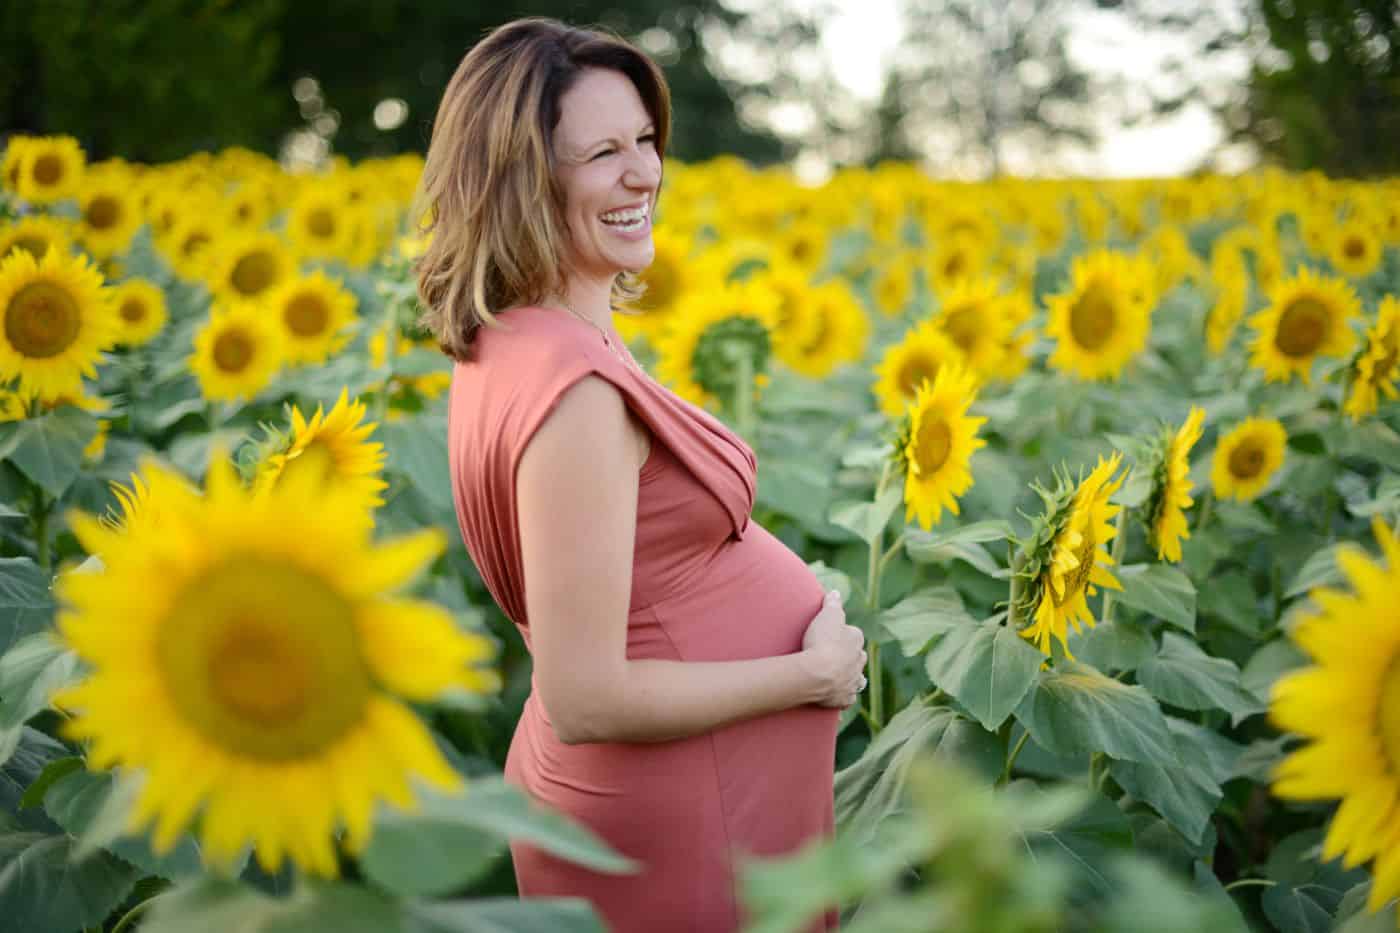 Andrea Nigh's simple maternity poses include this casual portrait of a mom-to-be holding her belly in a sunflower field